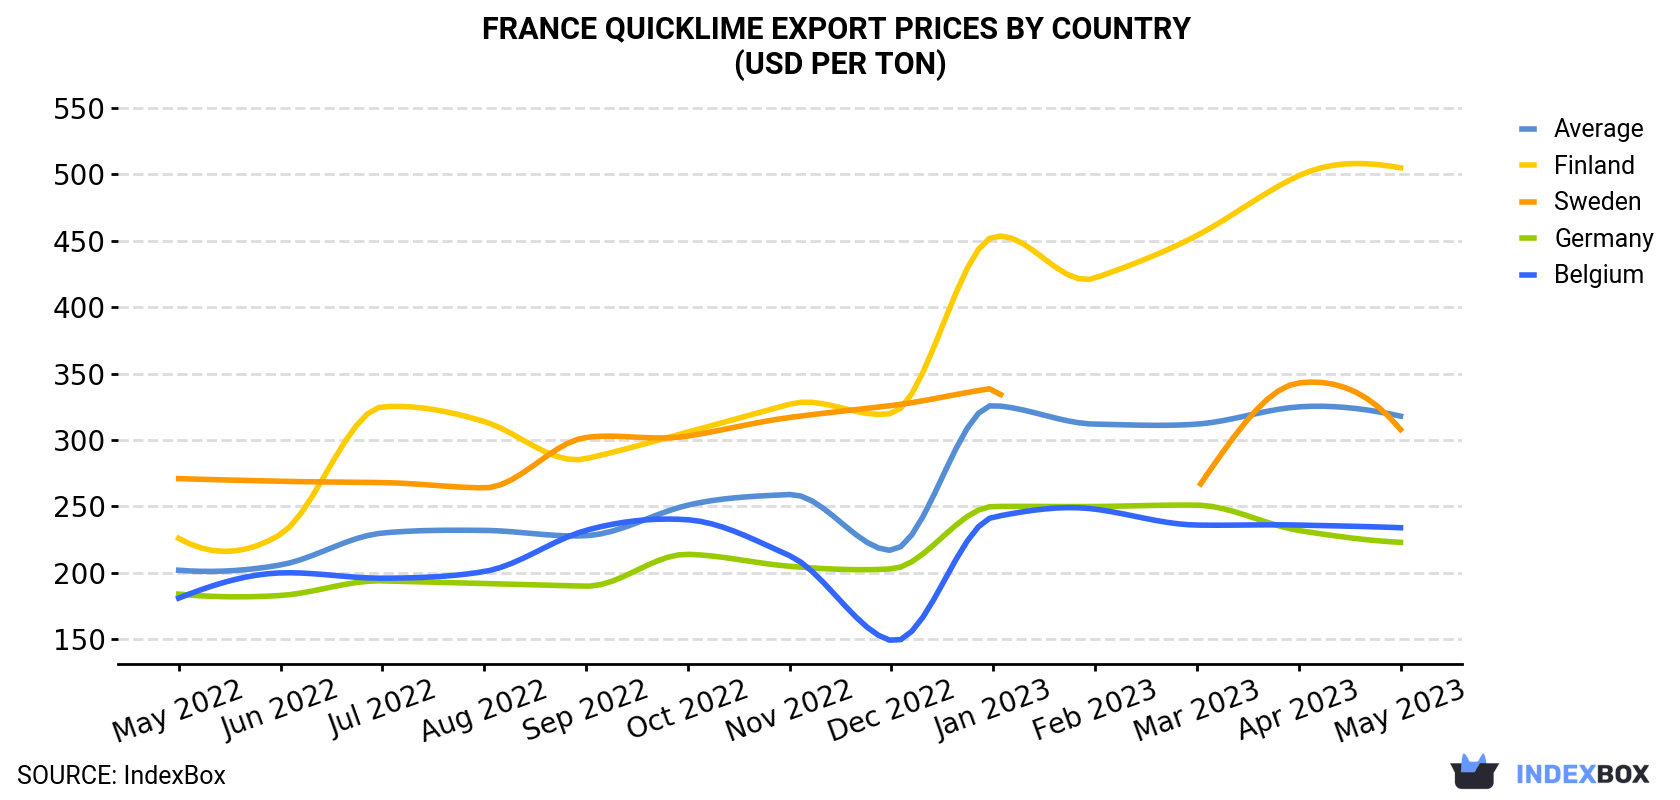 France Quicklime Export Prices By Country (USD Per Ton)